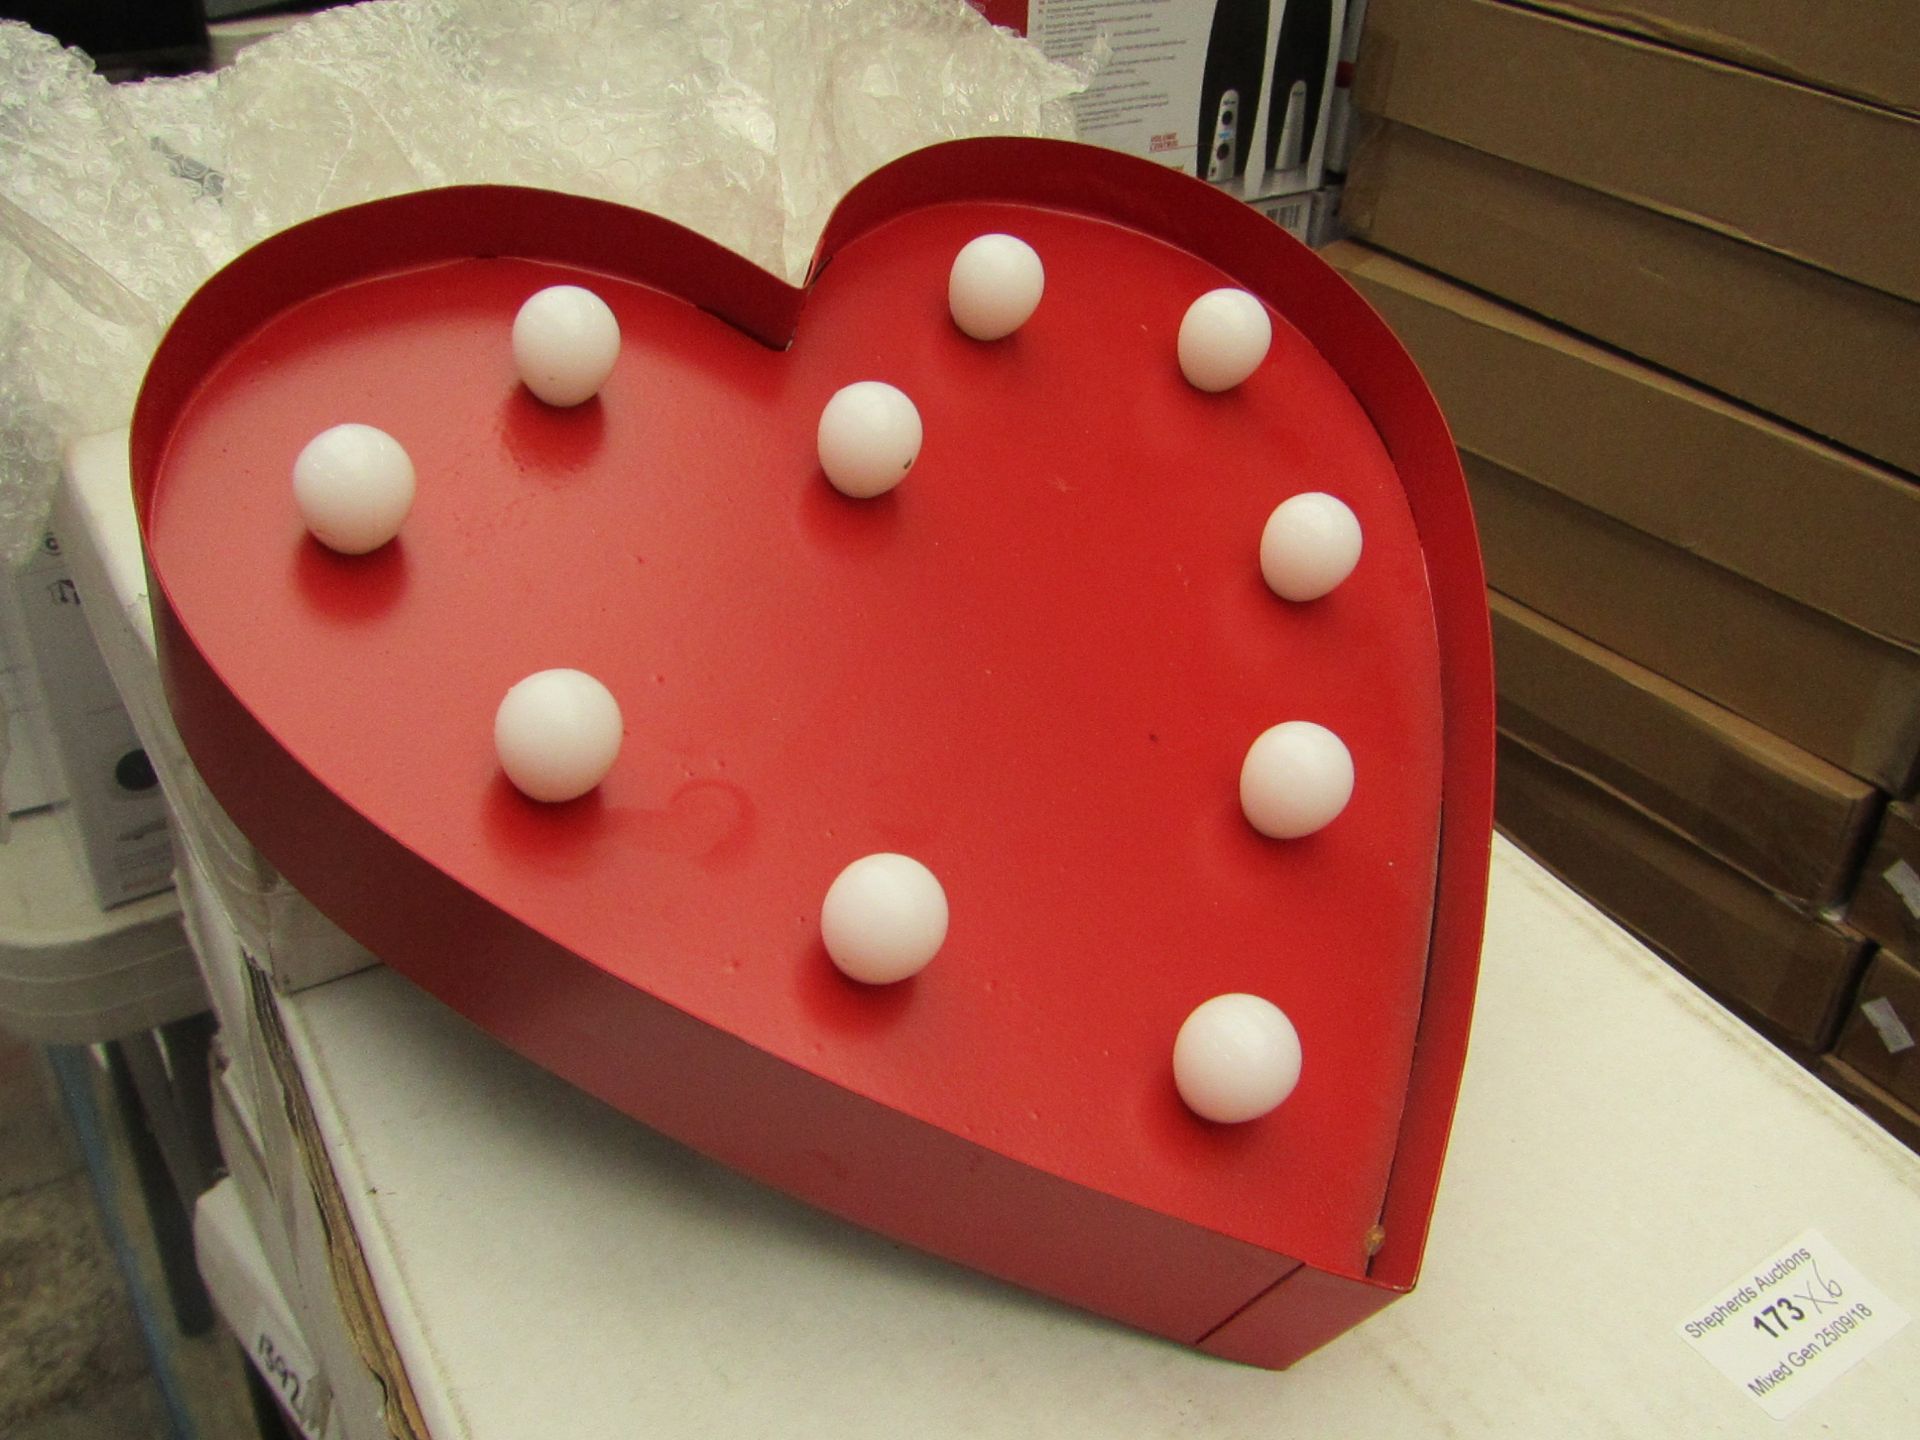 6x Love heart light up decorations, all new and boxed.